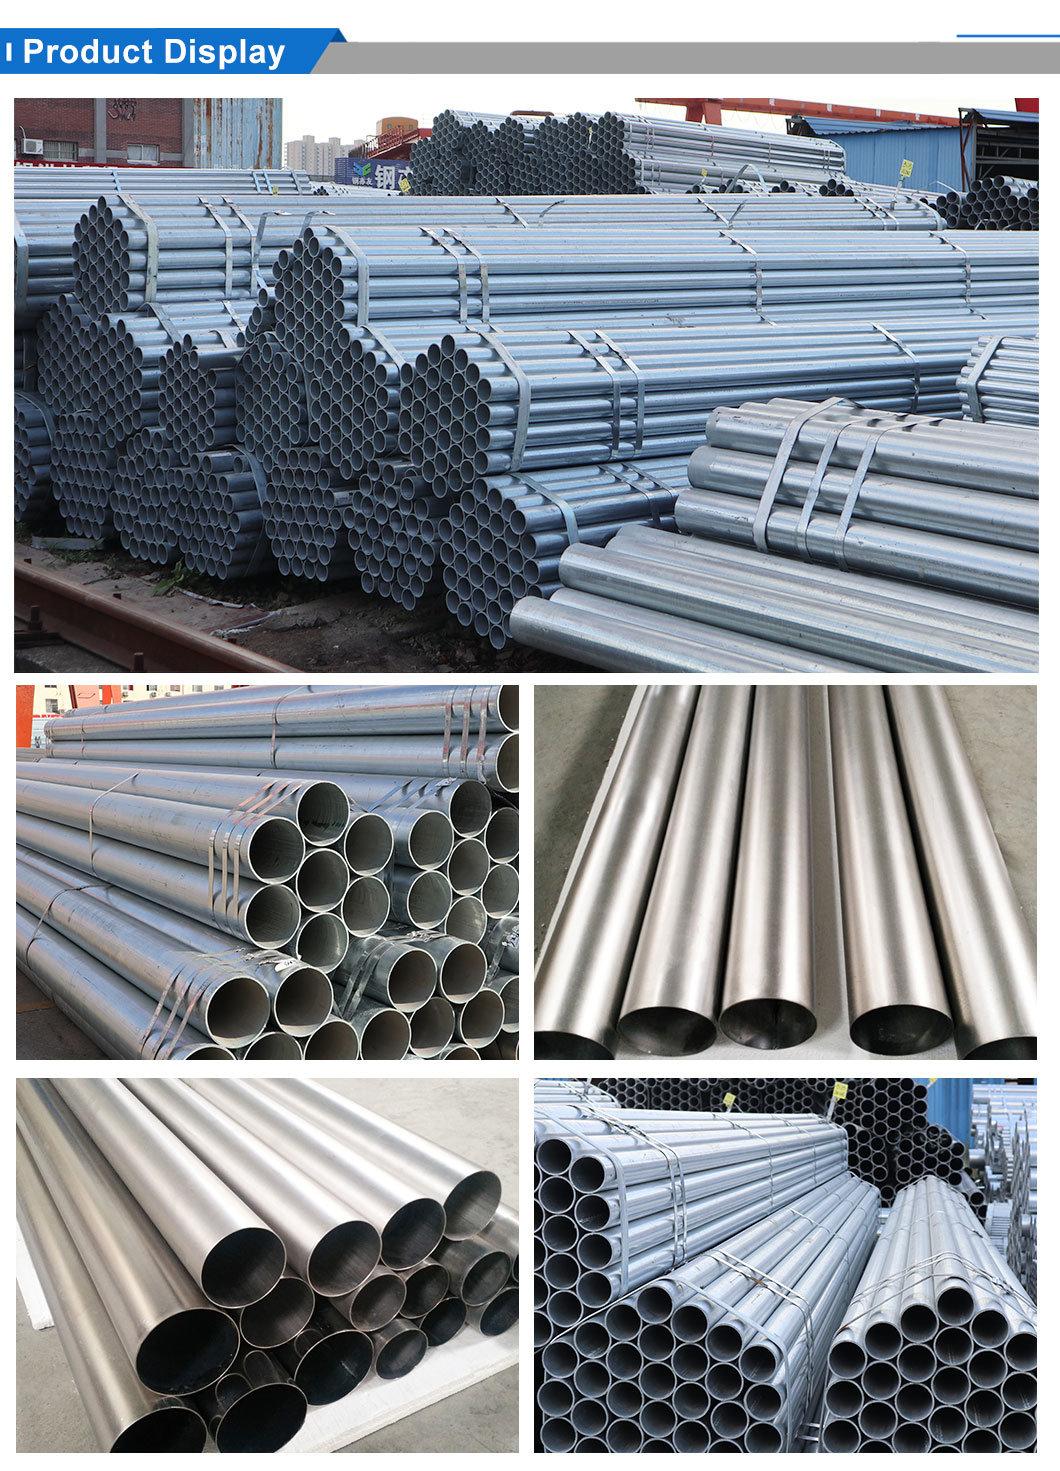 Prepainted Galvanized Iron HDG Roofing Seamless Material Pipe